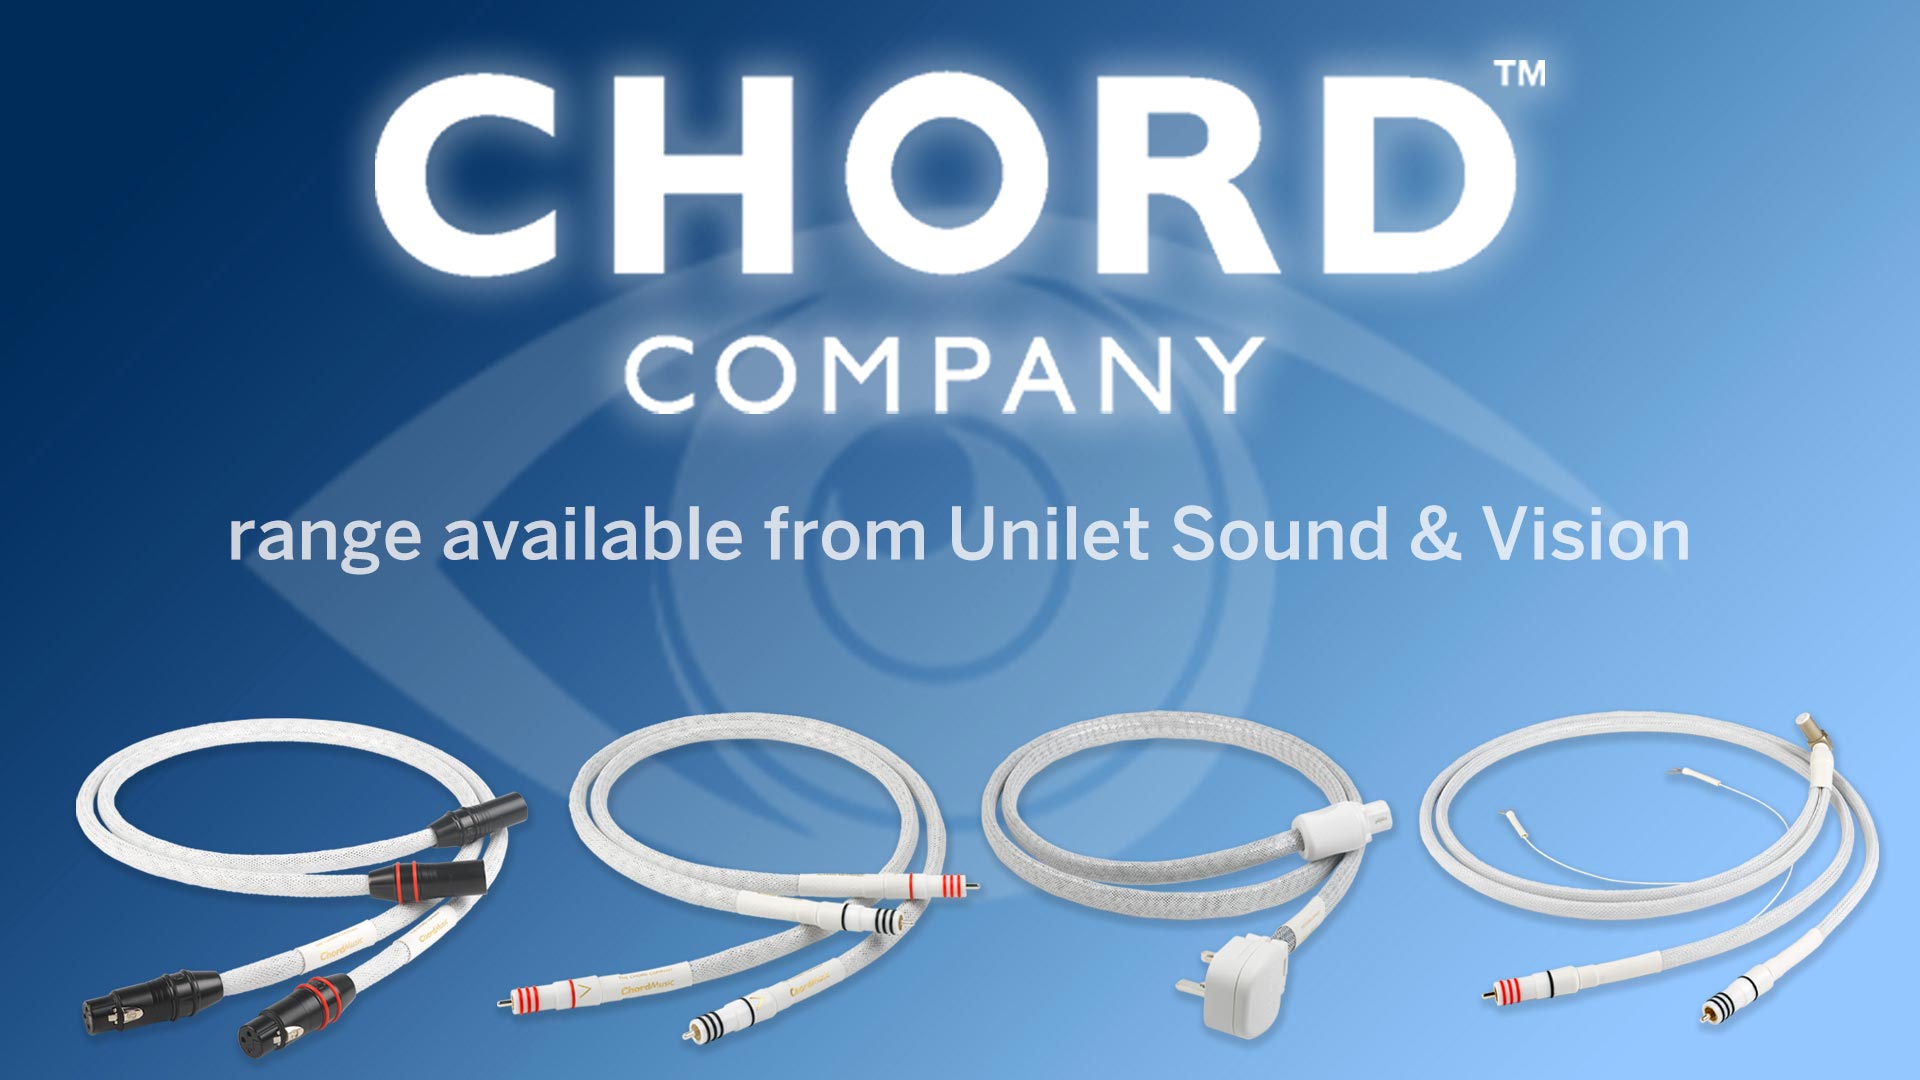 The Chord Company Cable Range | Unilet Sound & Vision